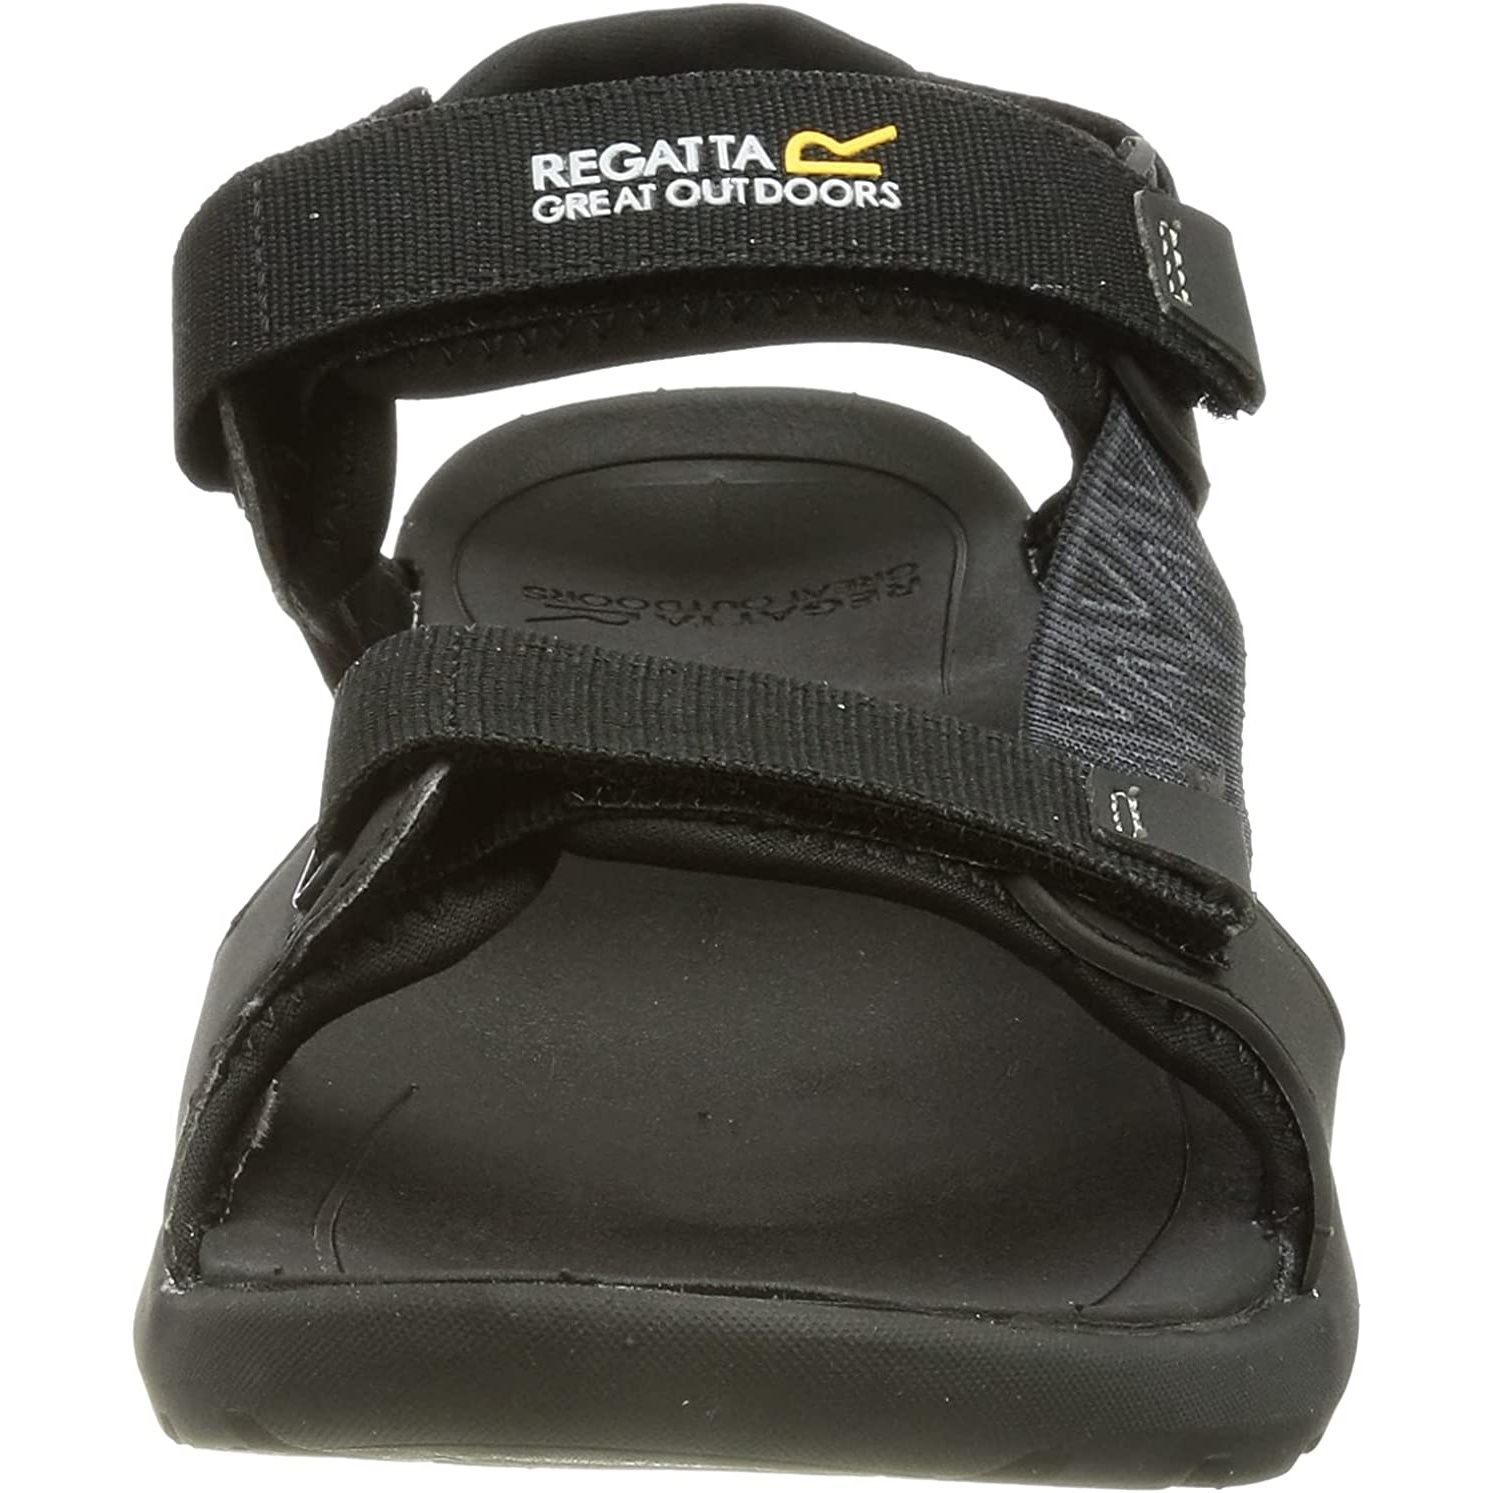 Material: 40% polyester, 30% rubber, 30% polyurathane. Webbing upper with neoprene backing for comfort and protection. 3 points of adjusment for versatile fit. Adjustable removable heel strap. Can be converted into a slide sandal. Shock absorbing compression moulded EVA footbed. New XLT sole unit provides flexible and lightweight underfoot comfort.